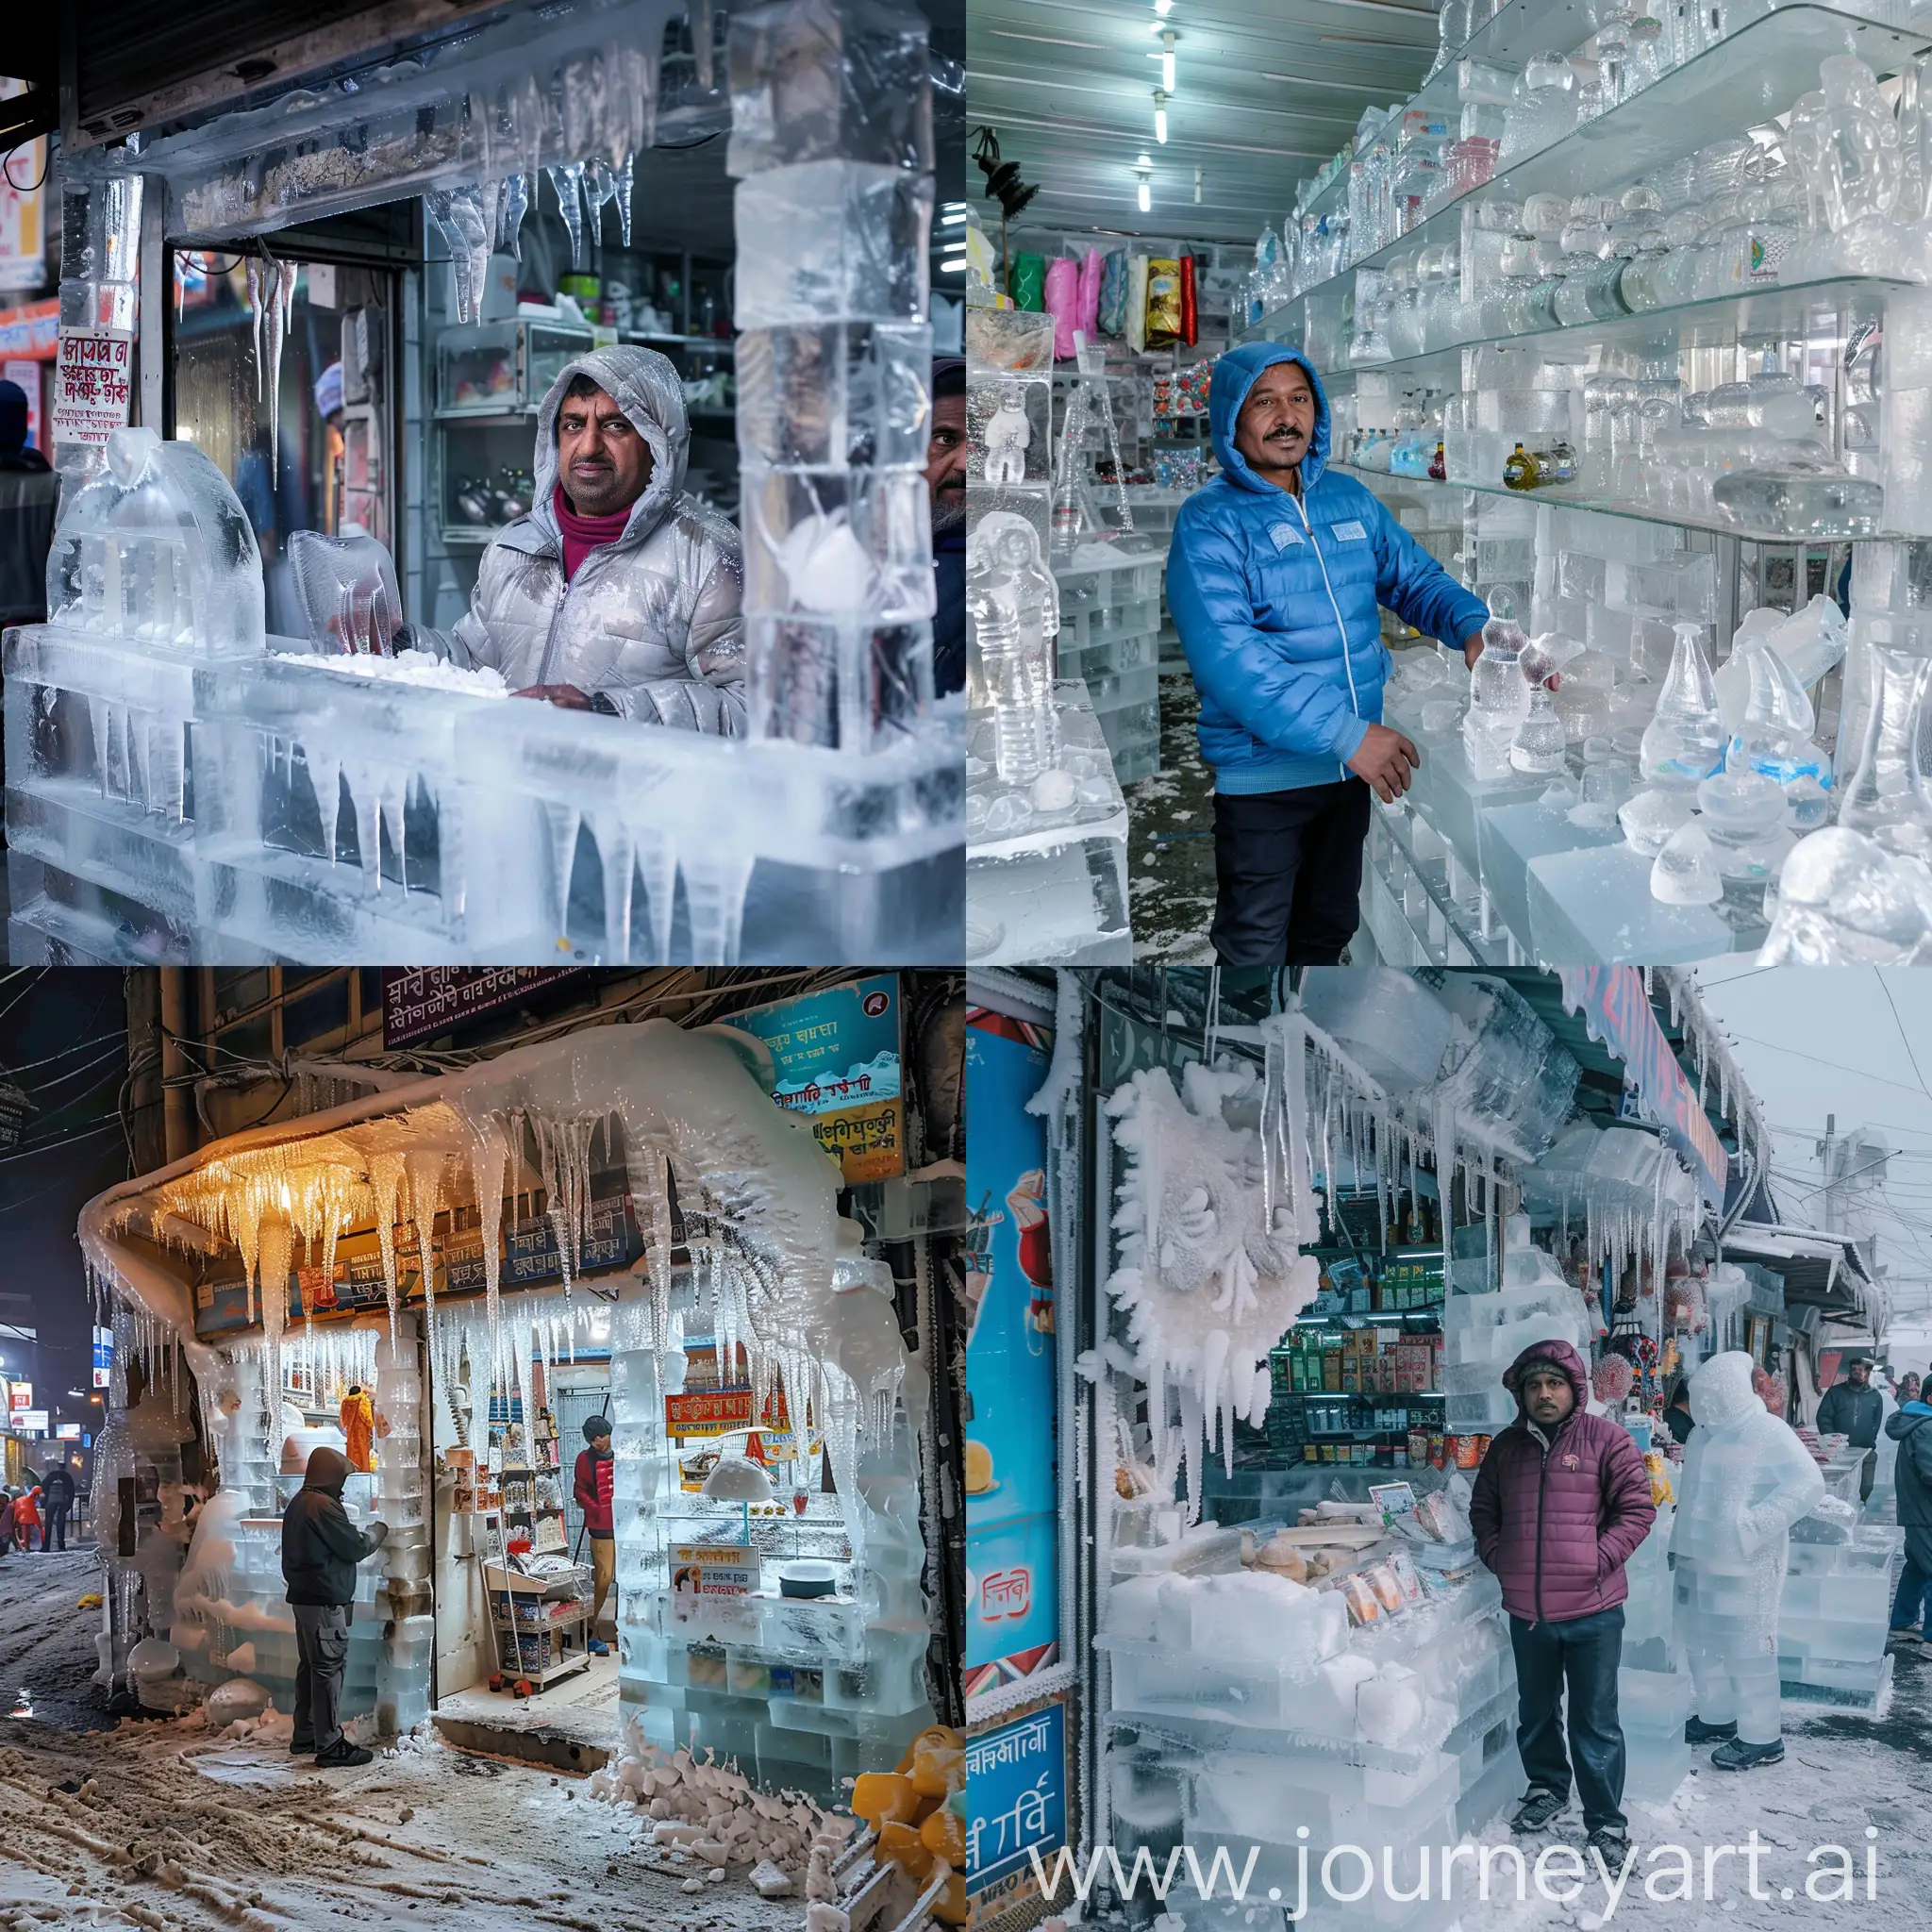 kolkata fully ice city, every shop made by ice, every man and woman wear a ice jacket,